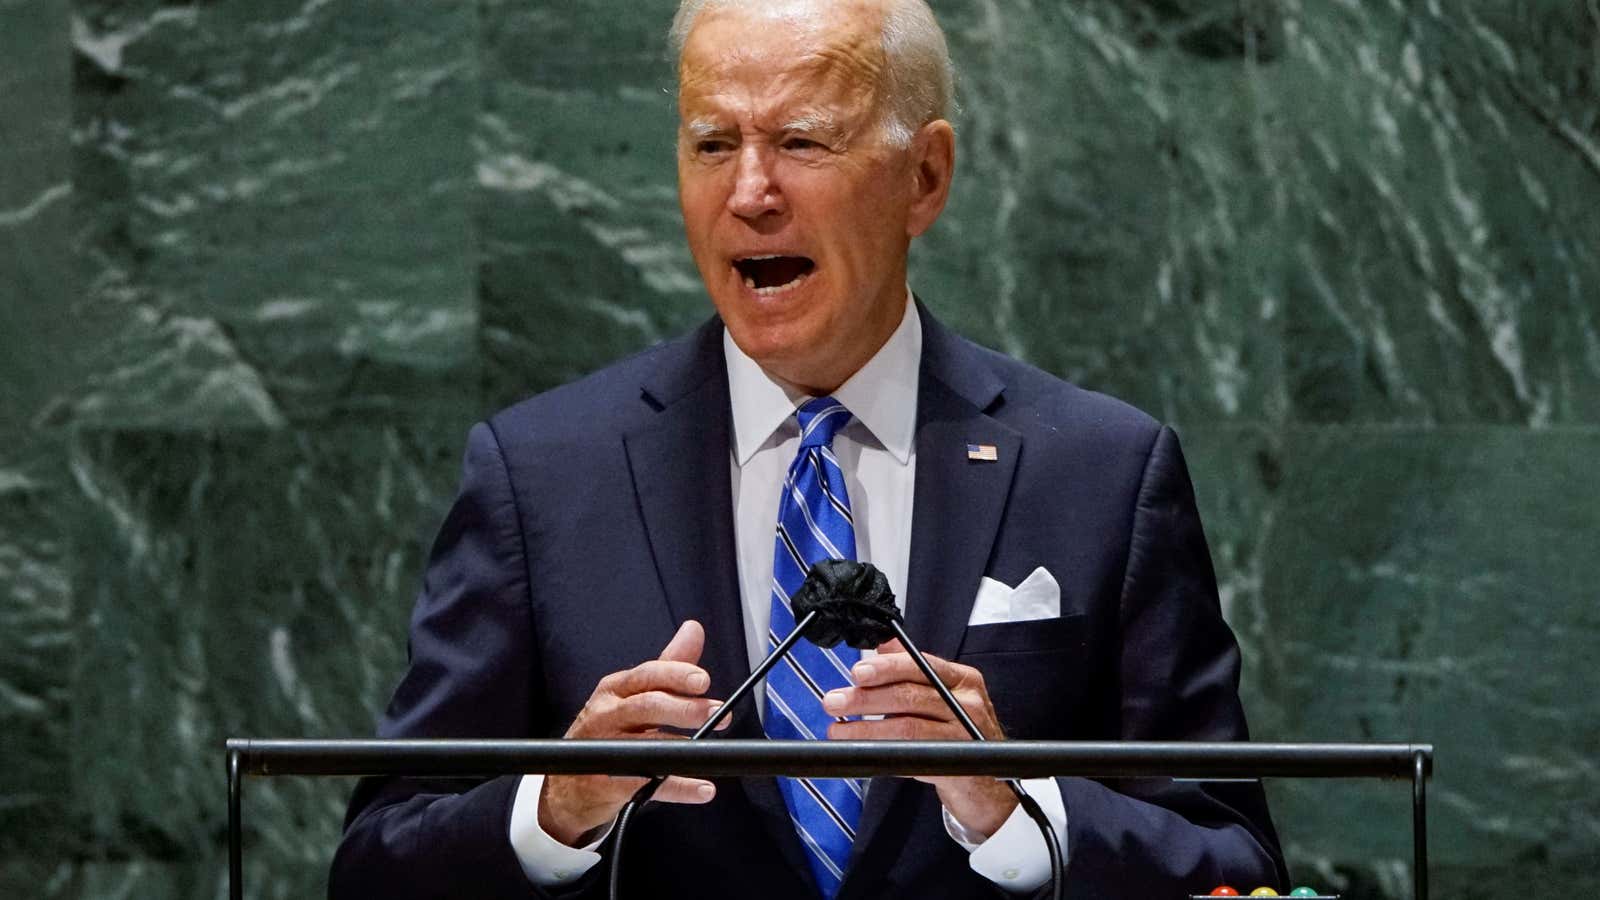 President Joe Biden has committed billions of dollars to help developing countries address climate change, but the net effect of such pledges is murky.